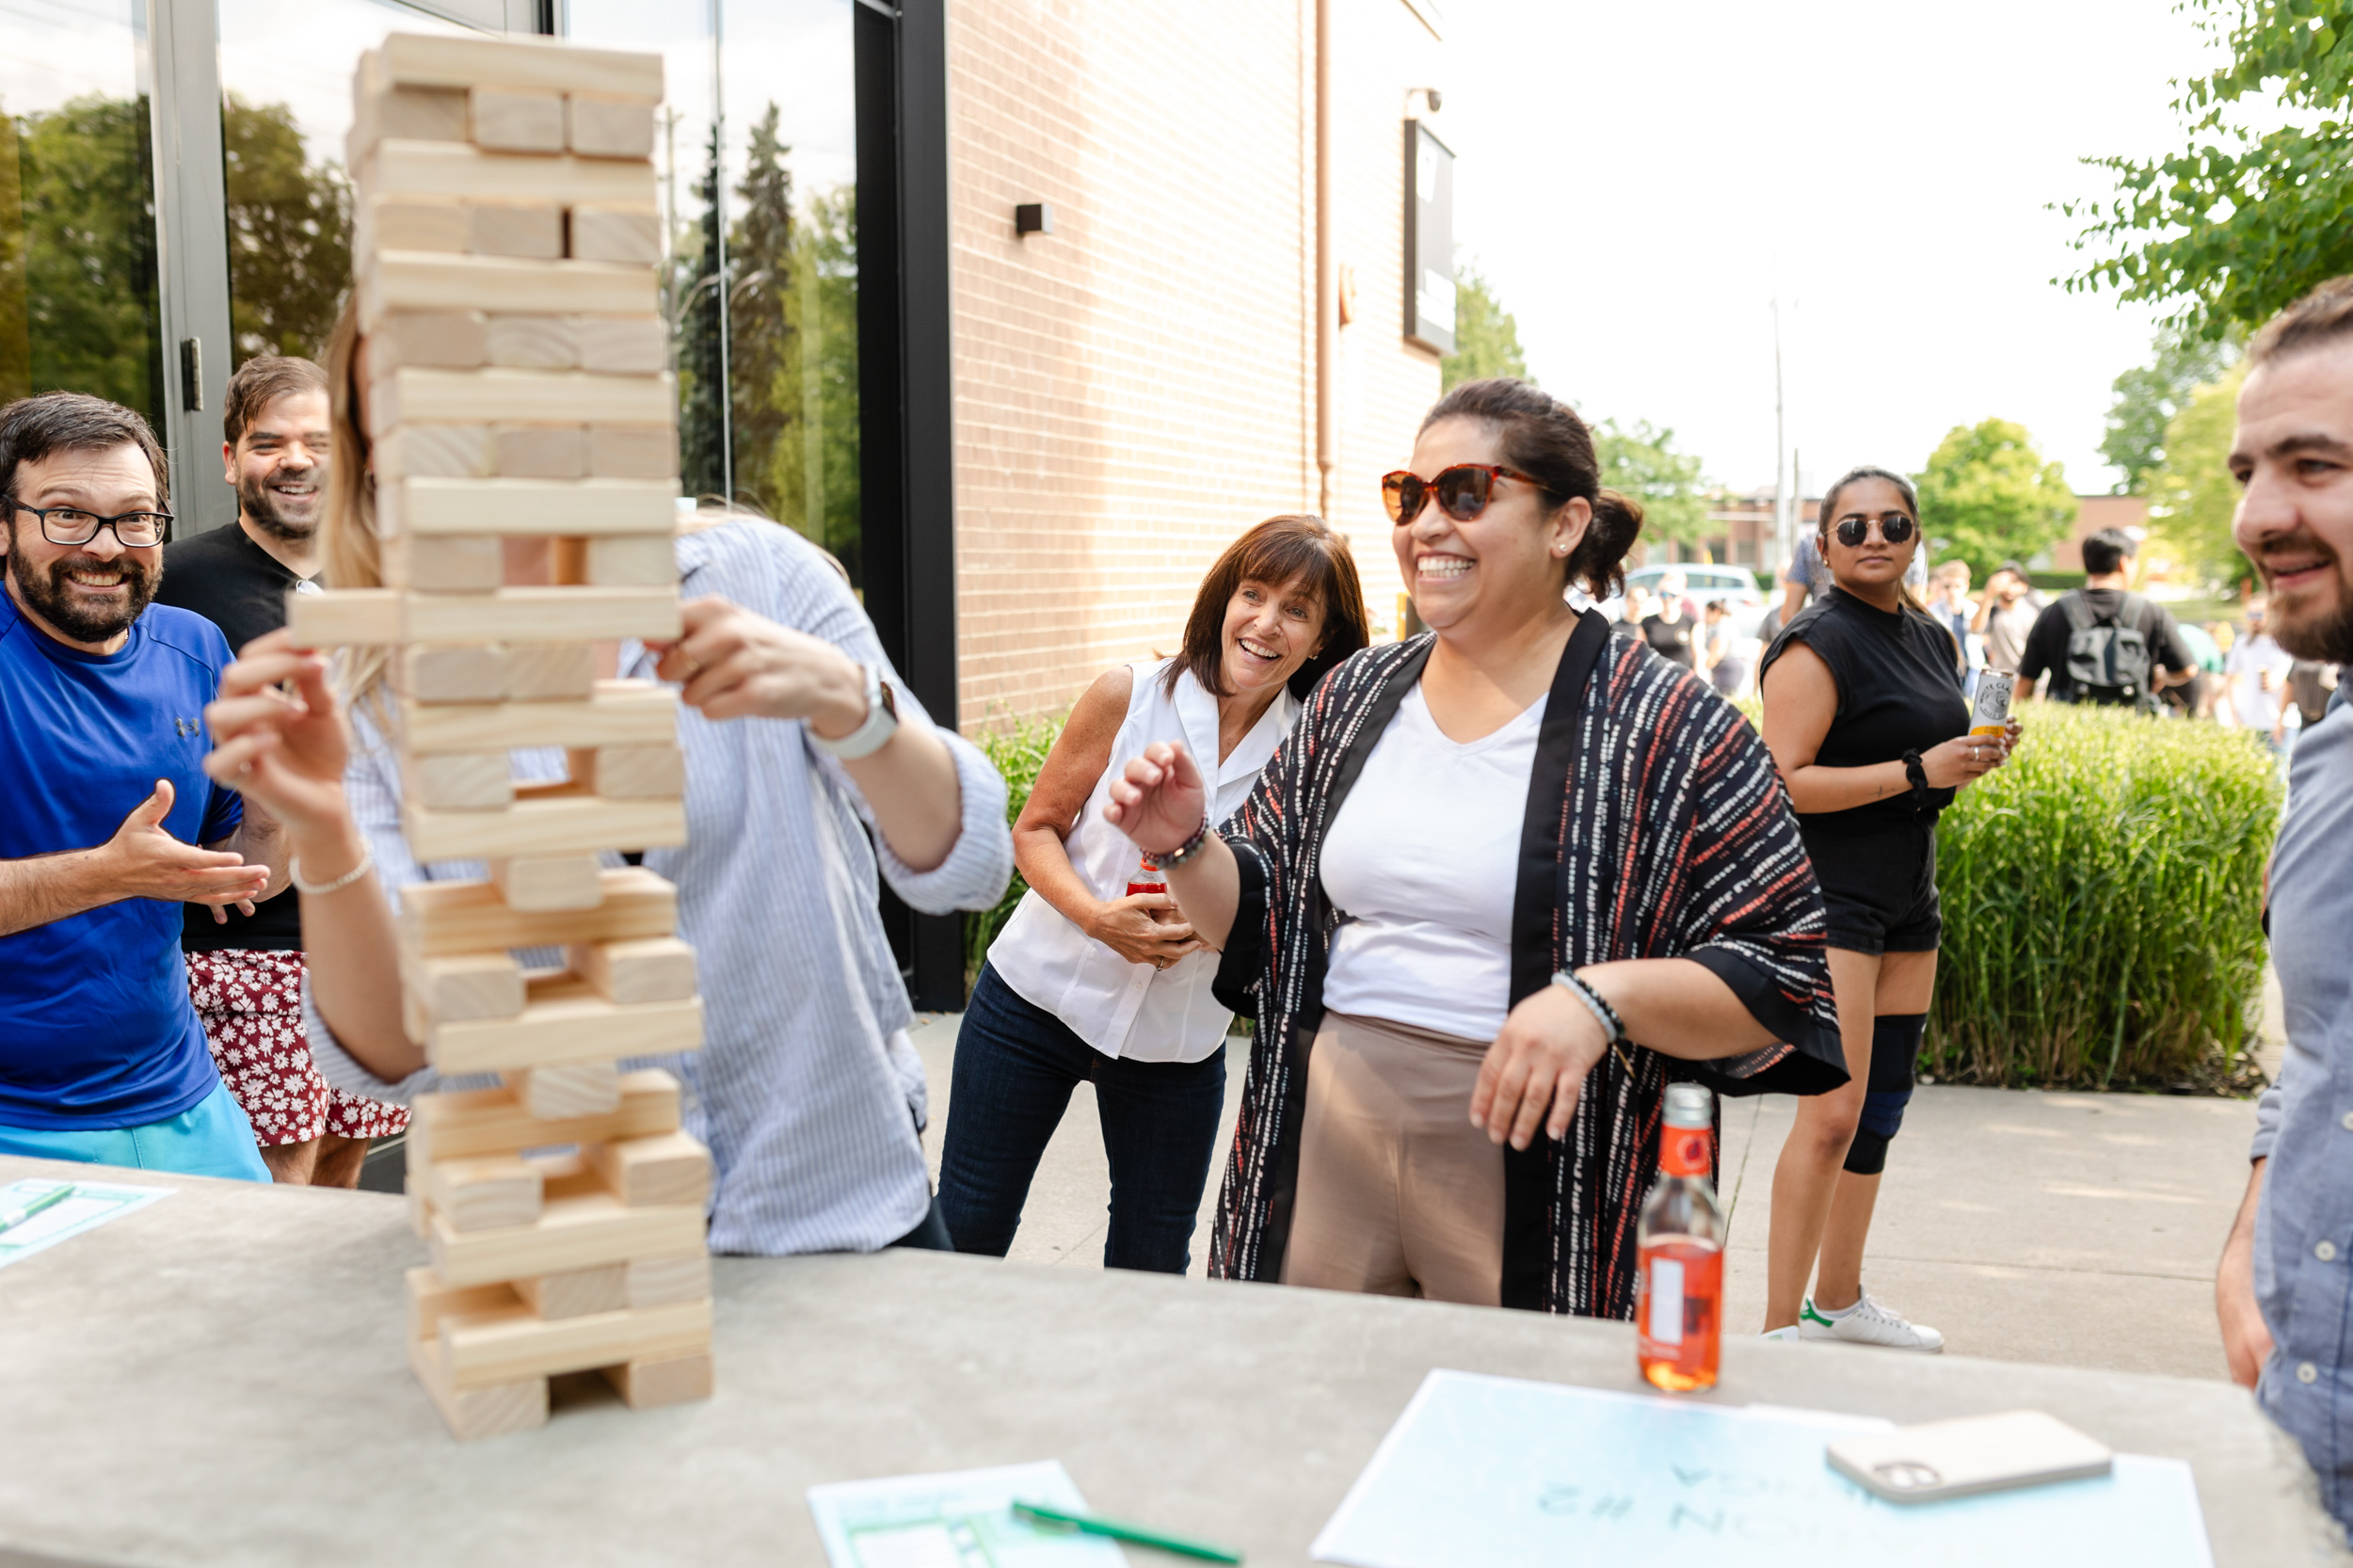 Social event of people playing a game of jenga captured through photography.